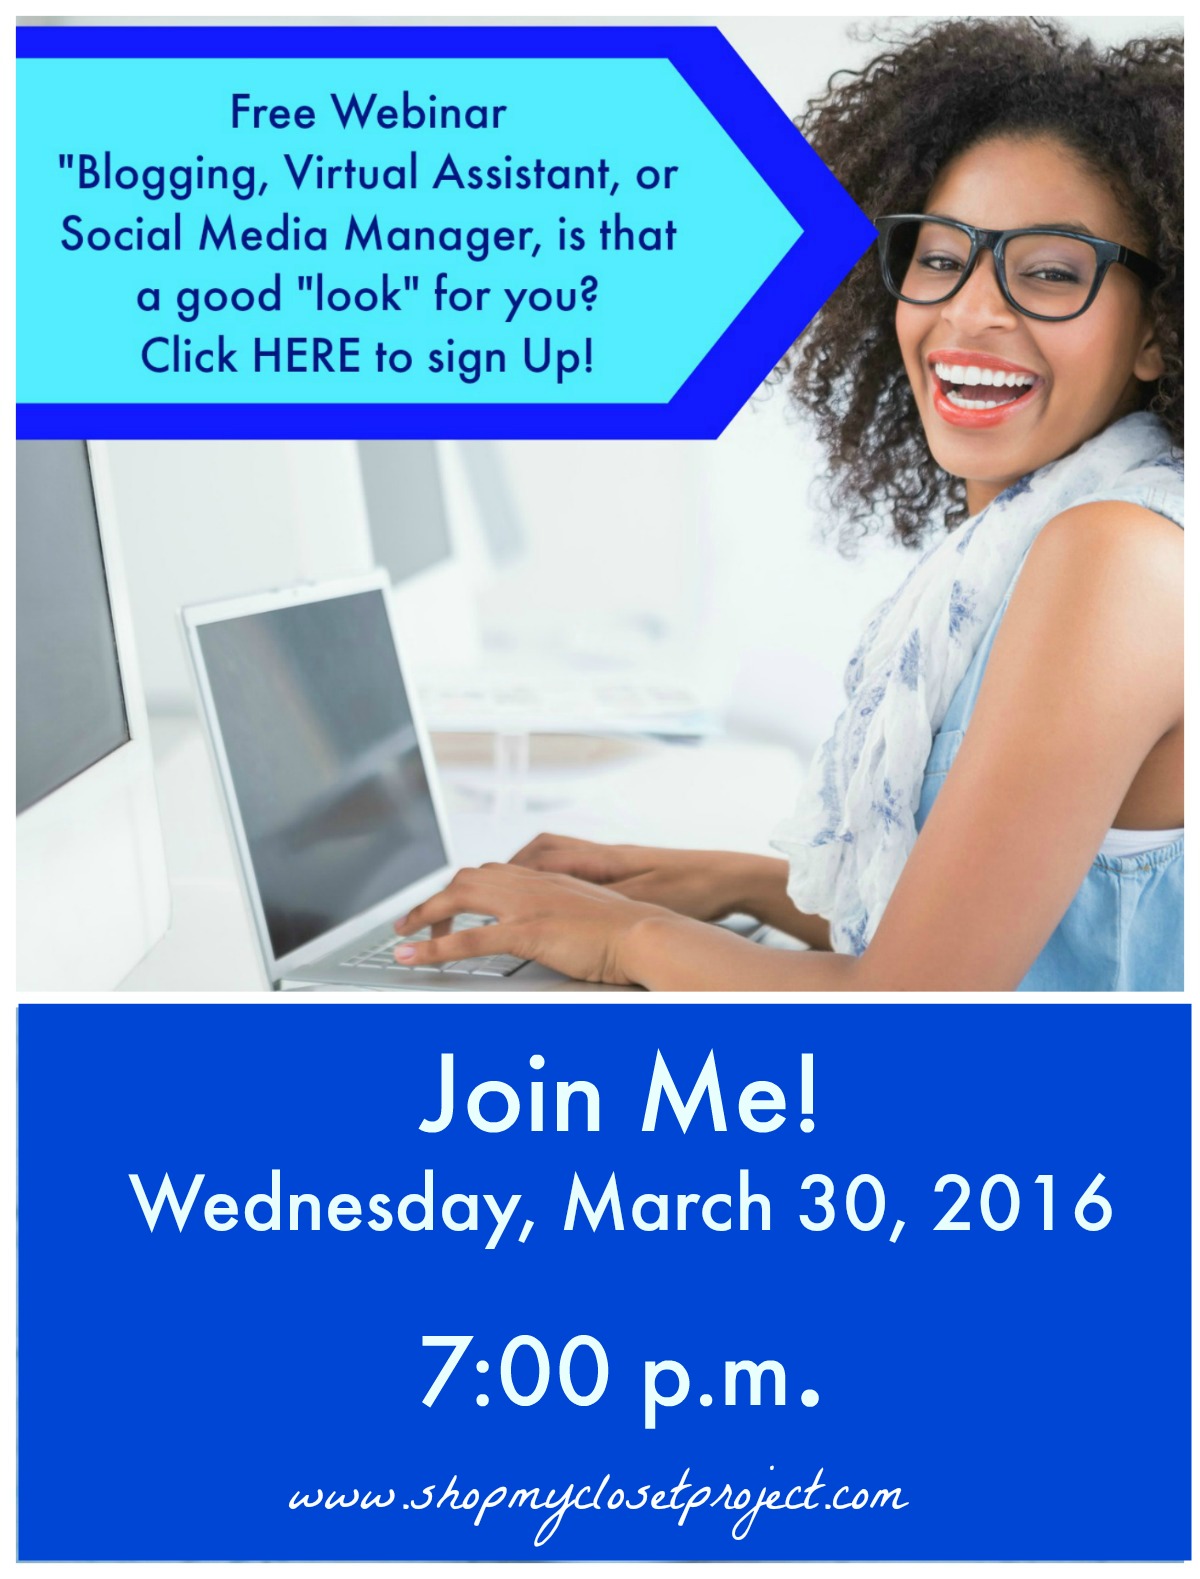 Blogger, Virtual Assistant, or Social Media Manager-Is This REALLY a Good “Look” For You?